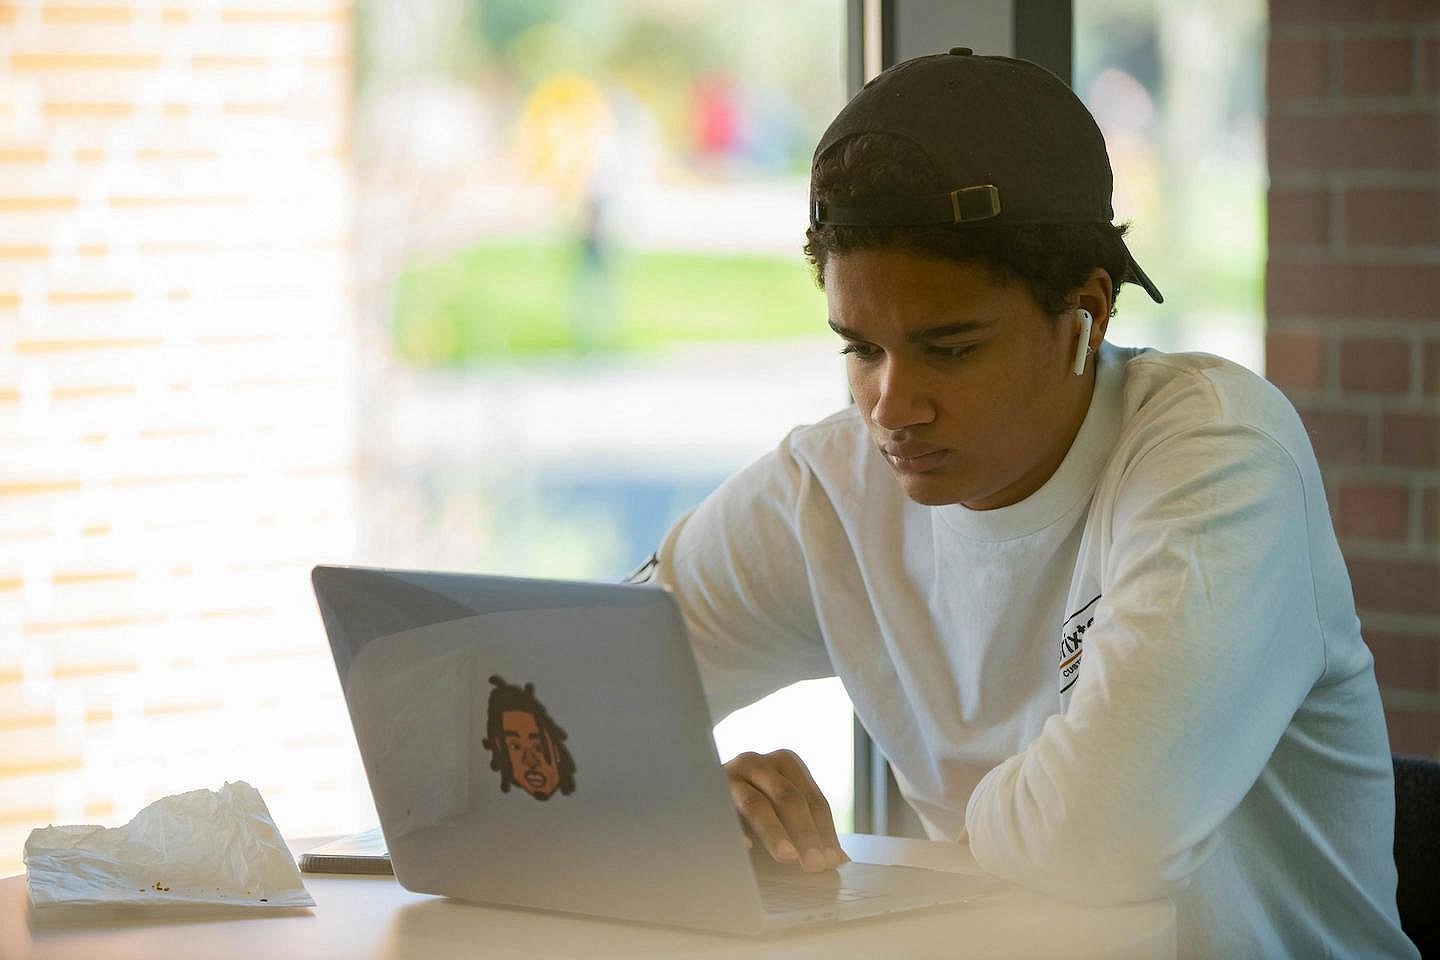 student on a laptop next to a window